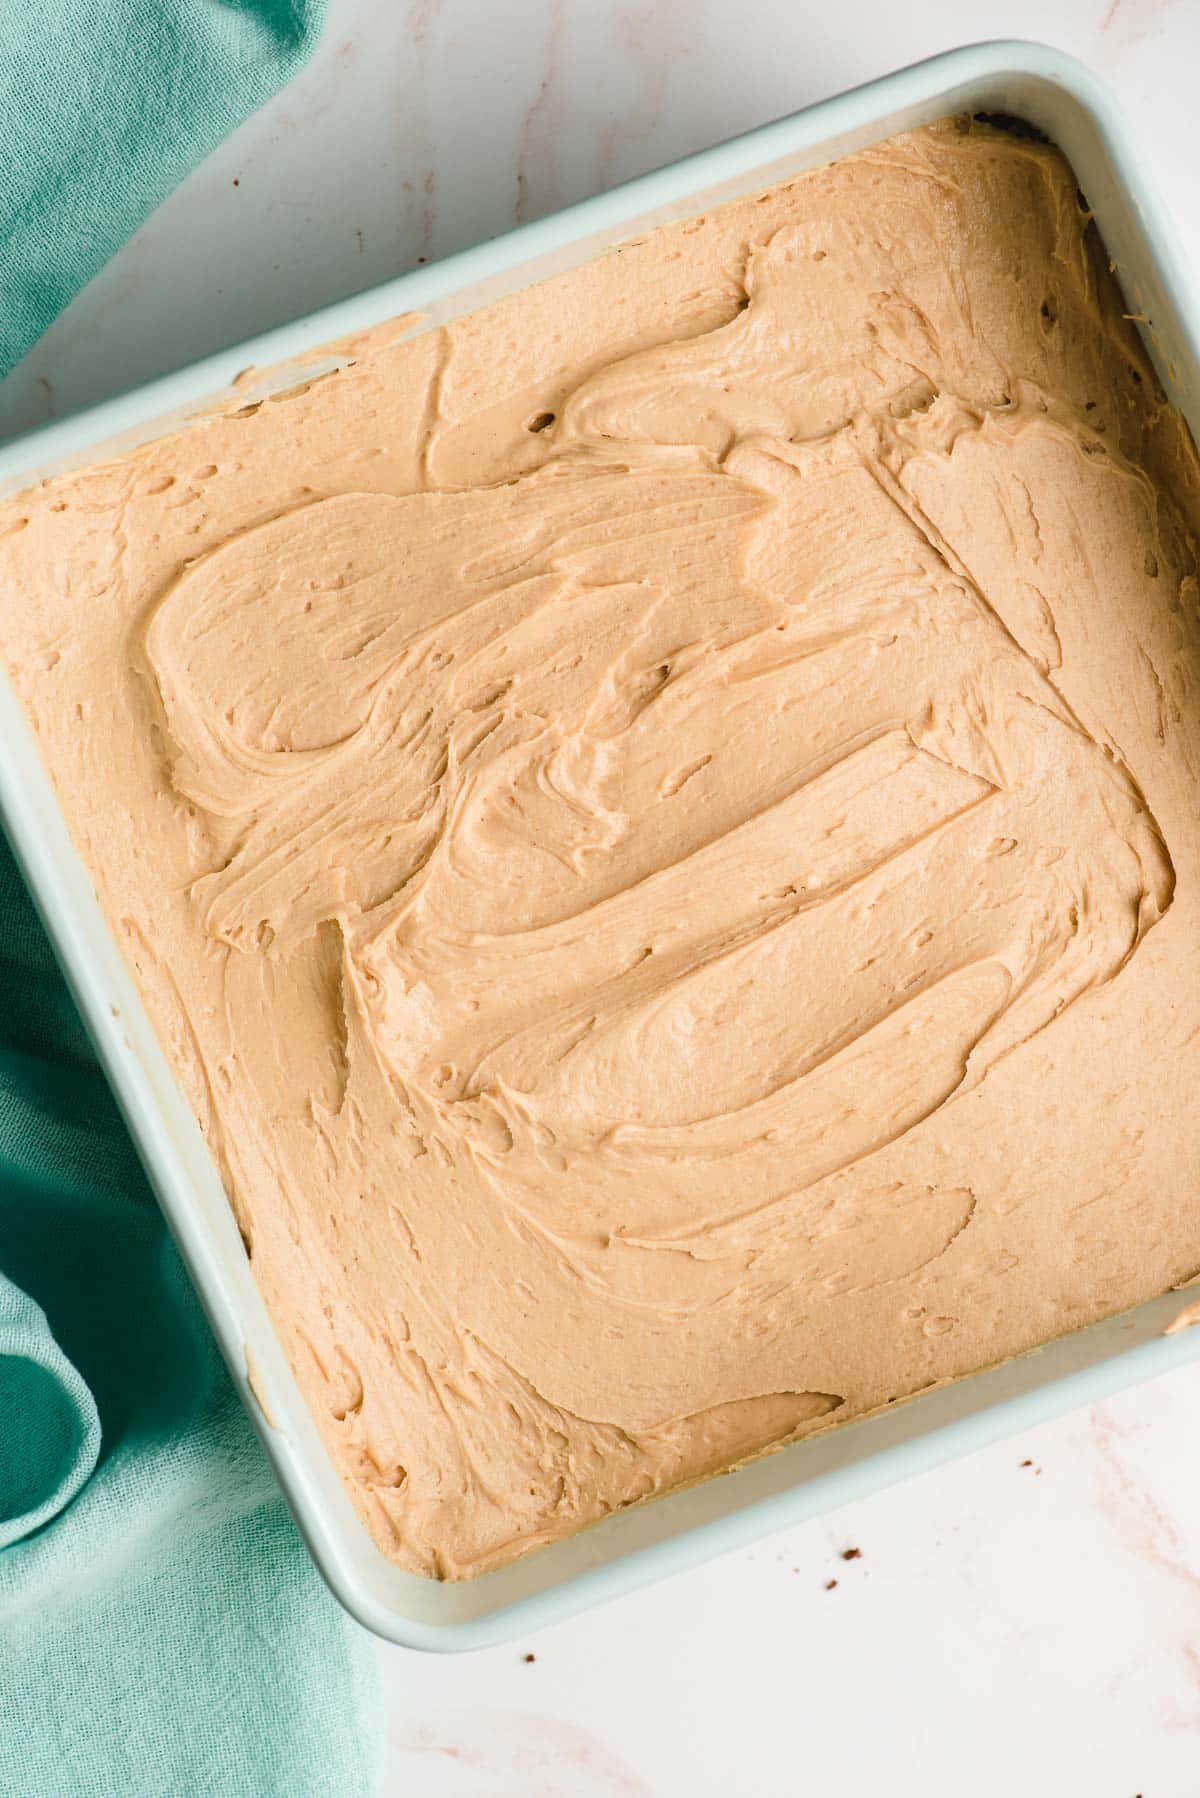 Creamy peanut butter filling spread over a pan of brownies.